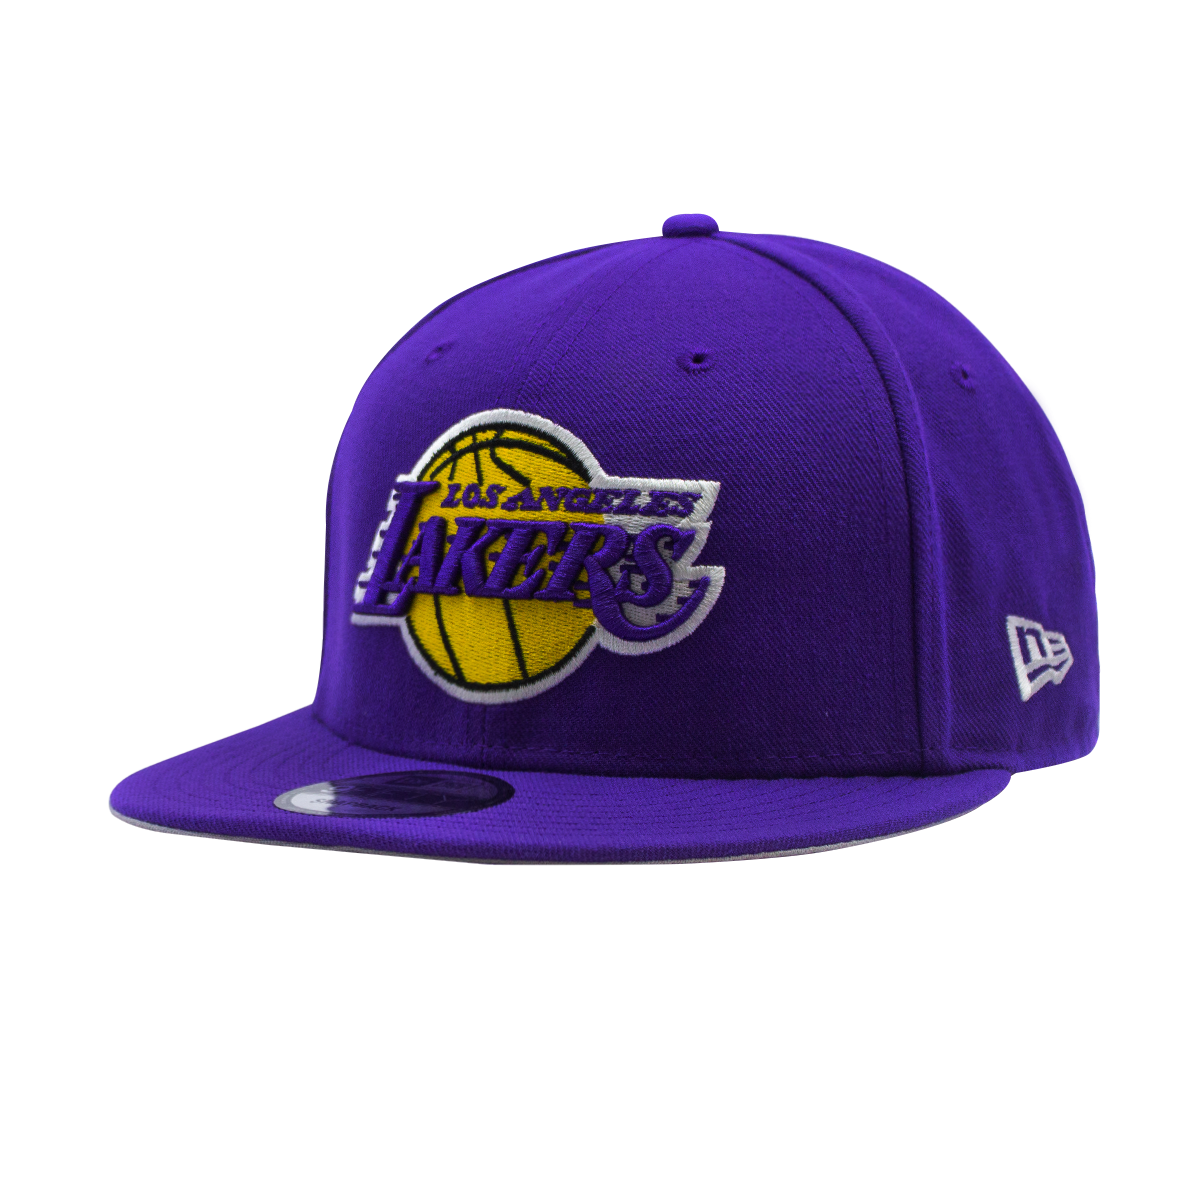 Pack de Jockey mitchell and ness Los angeles Lakers - Brooklyn new york